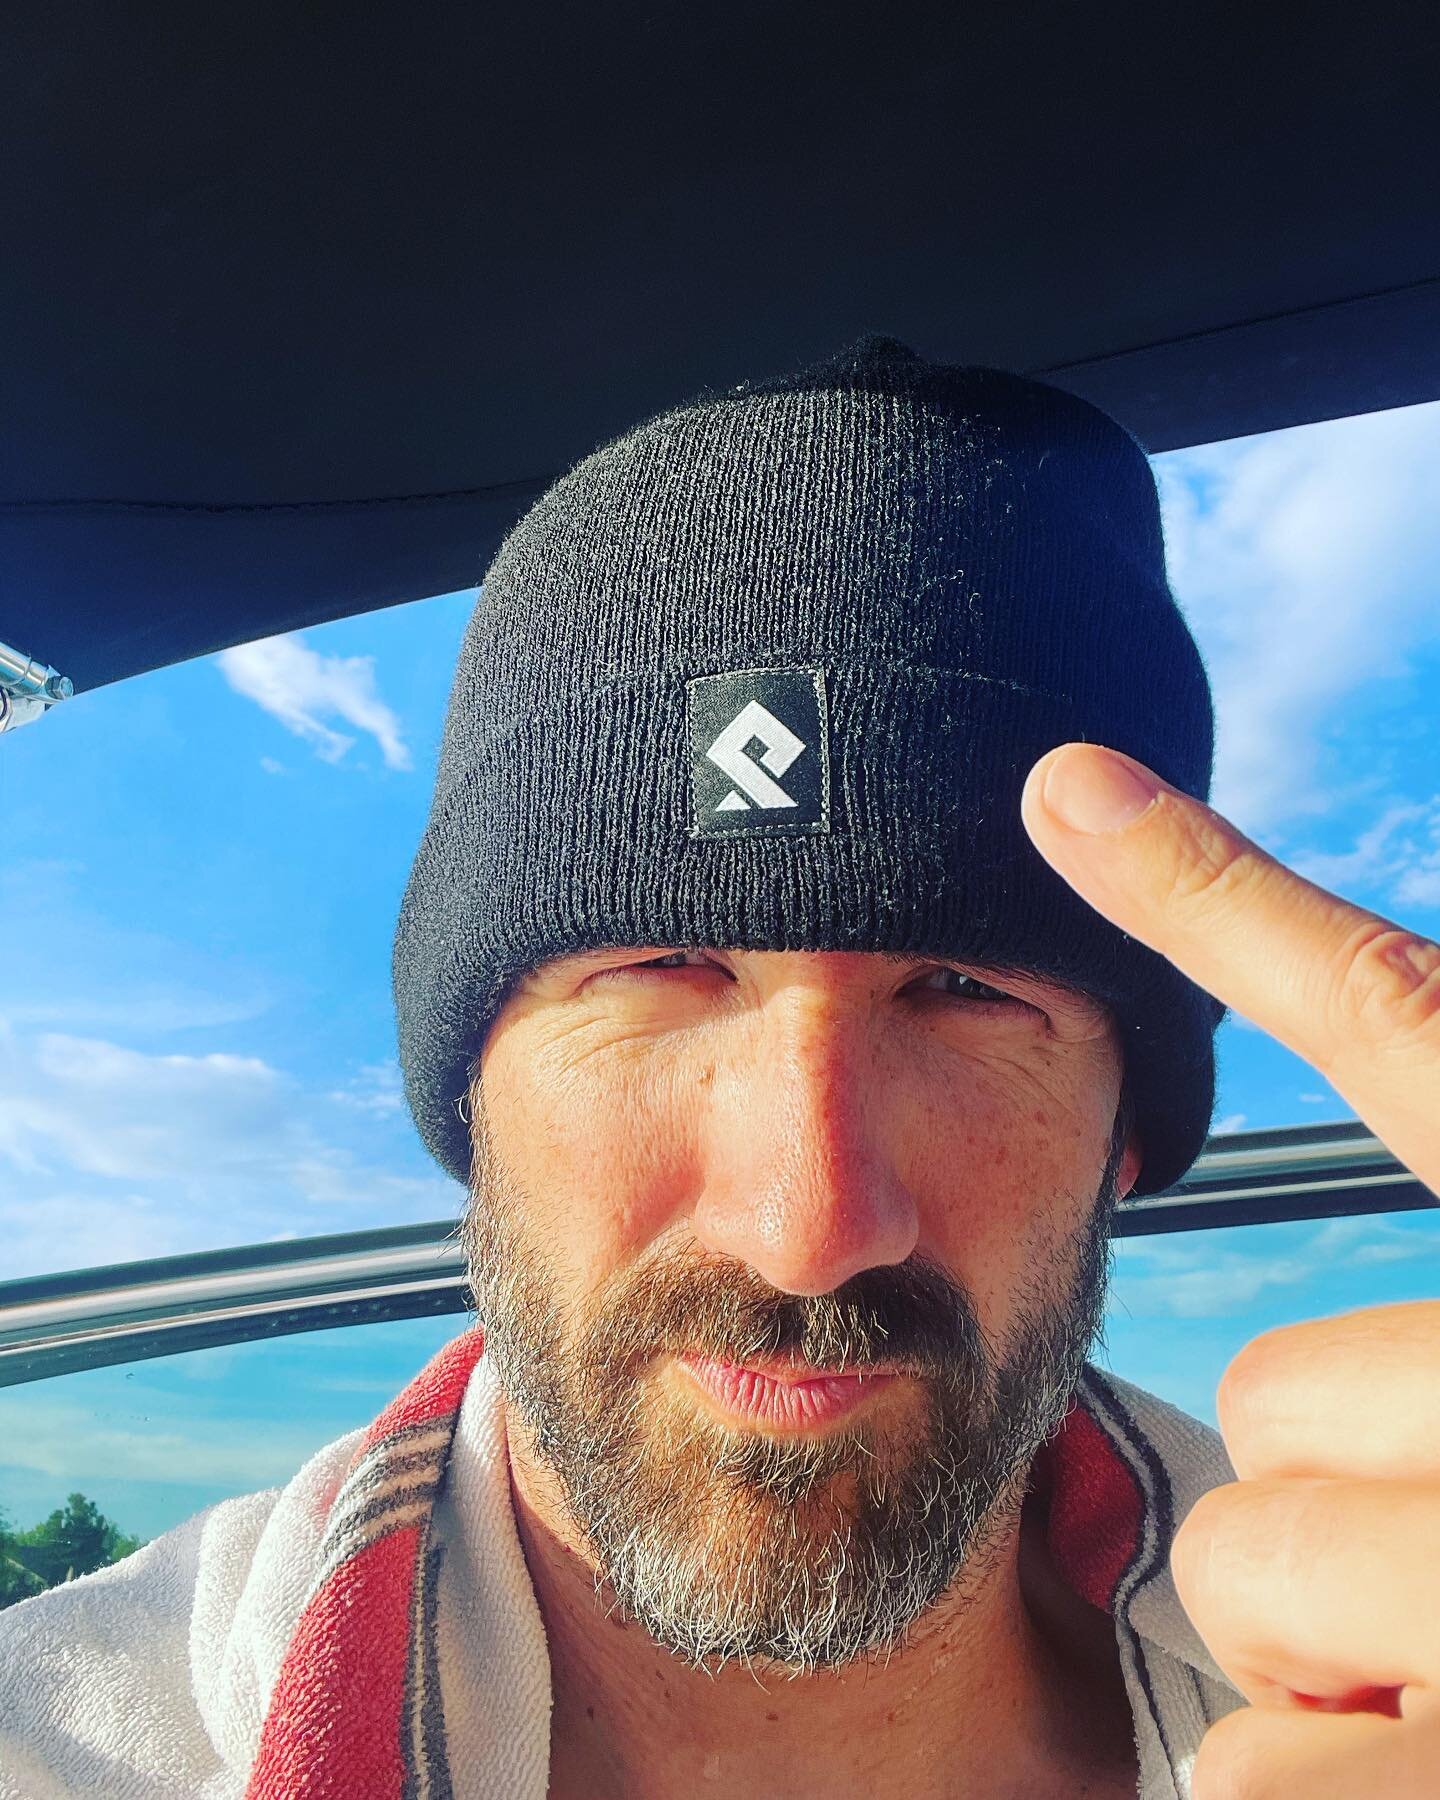 Early season skiing requires some warm gear from @pullsportcompany. Did I mention how comfortable these beanies are!?
#pullsport #lifeofawaterskier @miaminautique @mniboats #lakelife #swag #slalomski #trickski #jump #skiboat @jsteele83